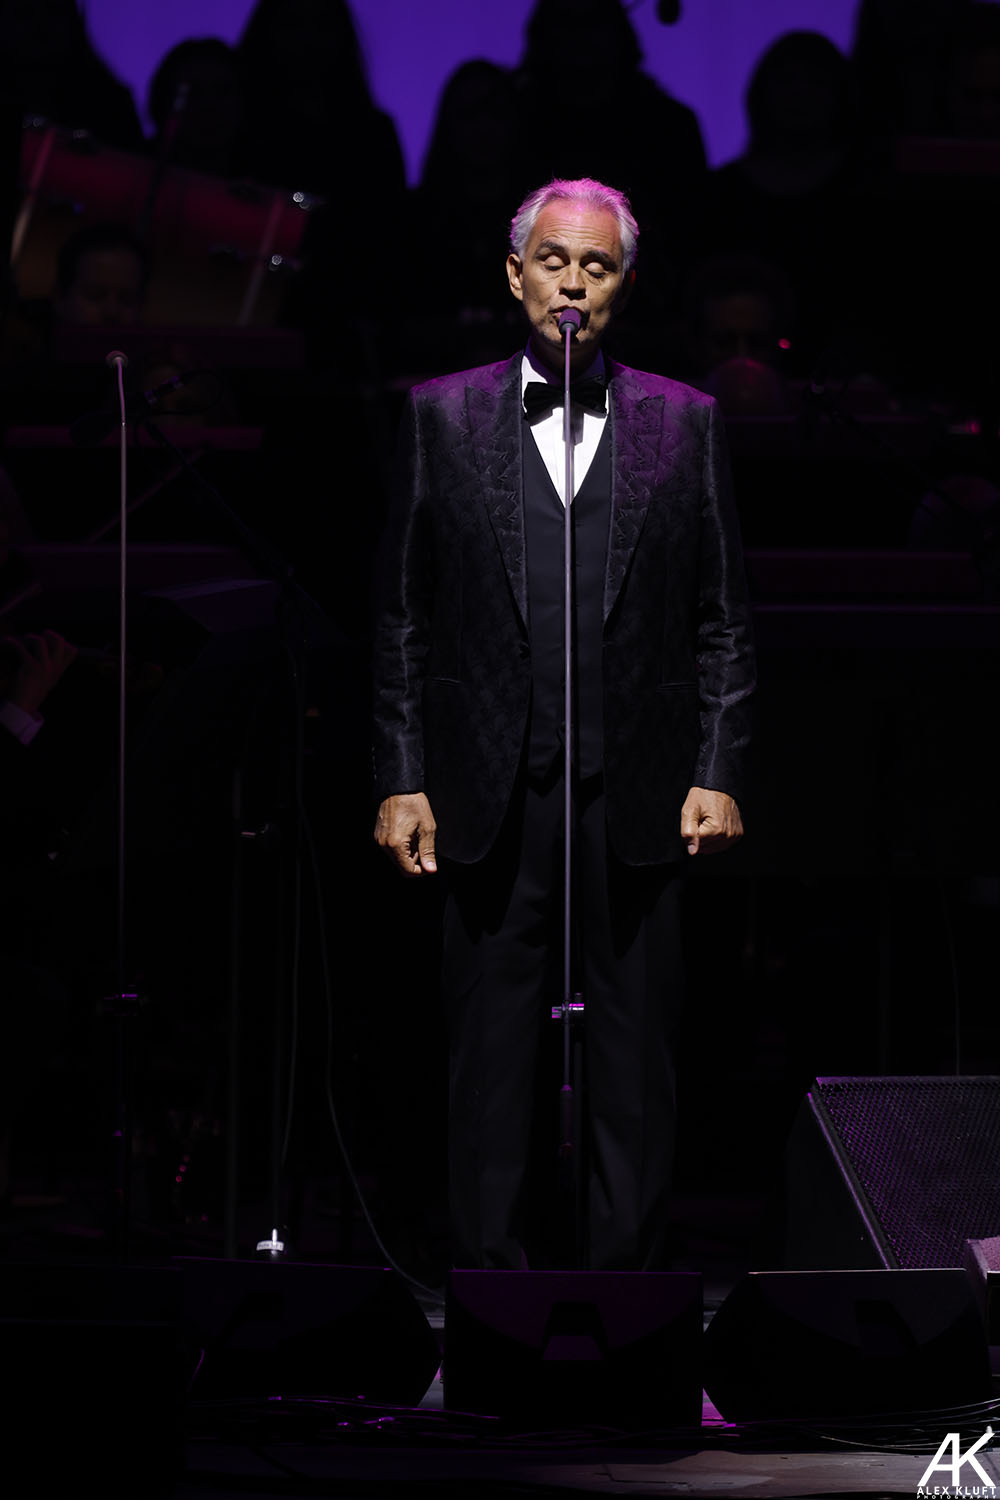 Andrea Bocelli says he is 'privileged' to work as they sing